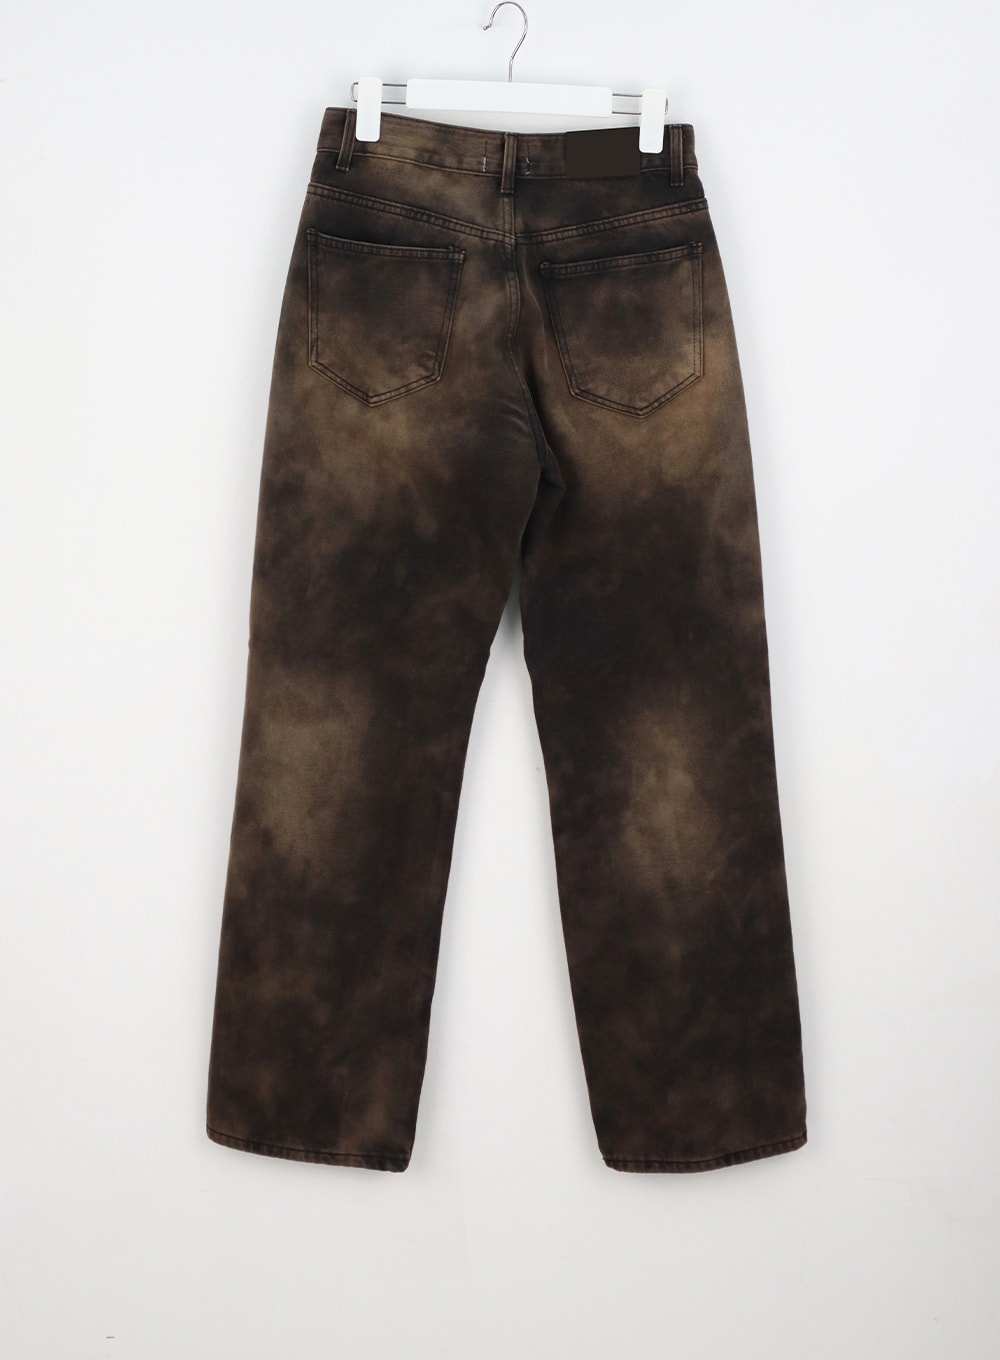 Brown Jeans Unisex CY322